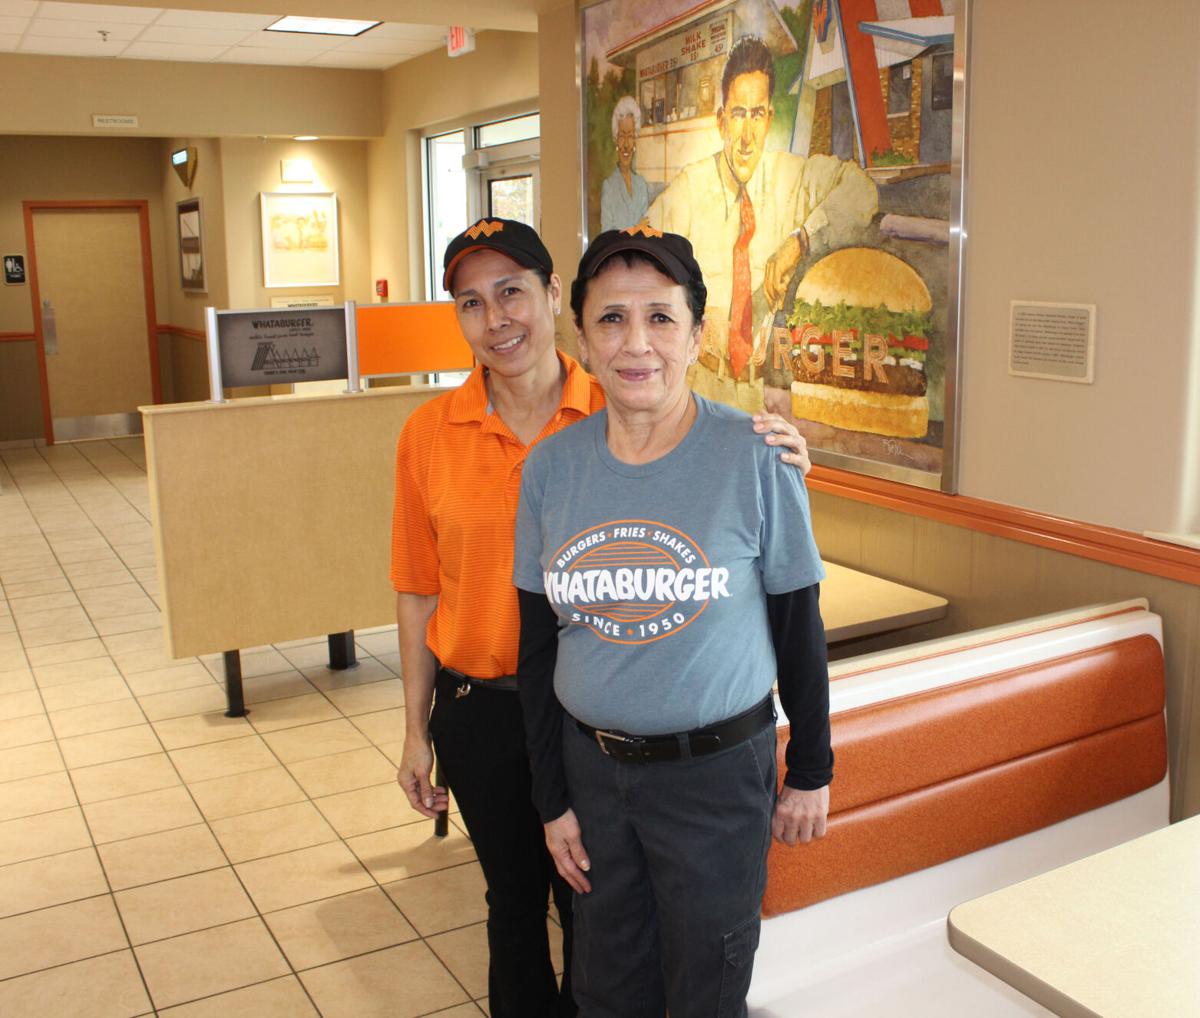 Popular Whataburger reopens after remodel, Local